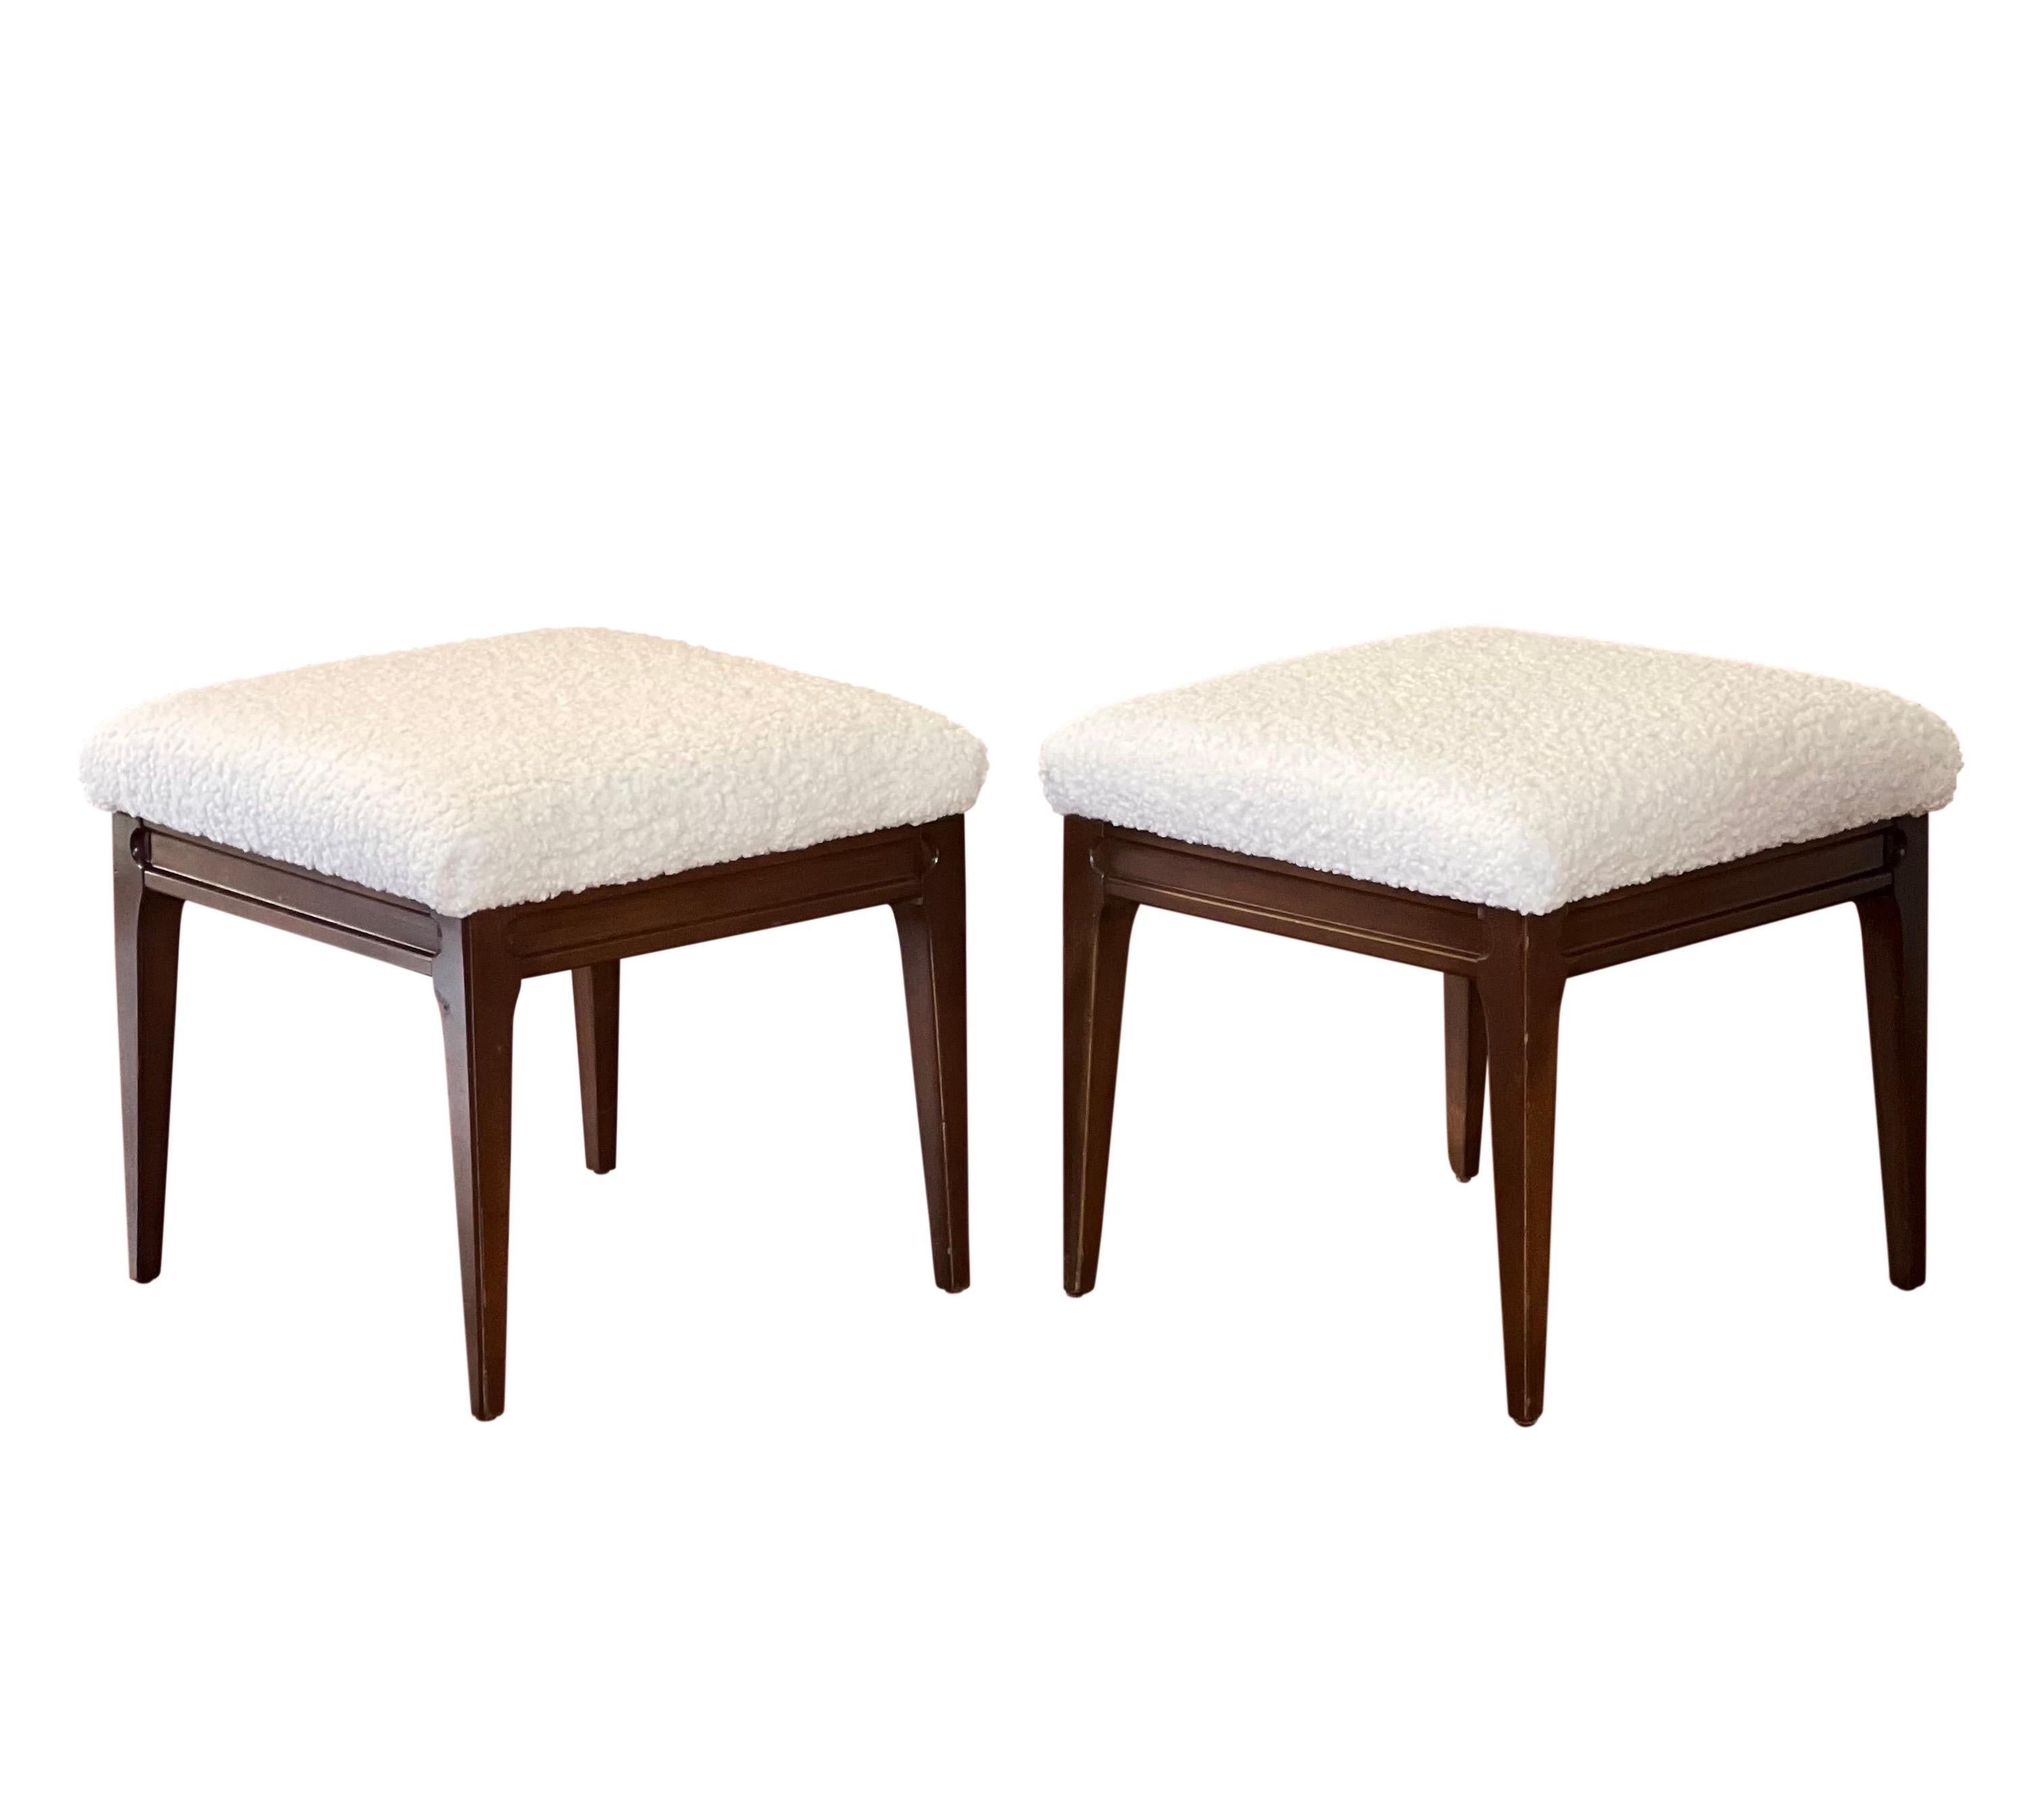 Elegant pair of vintage mid century walnut bouclé stools or benches, newly reupholstered.

The versatile pair has many possibilities with a super clean style. In very good condition.